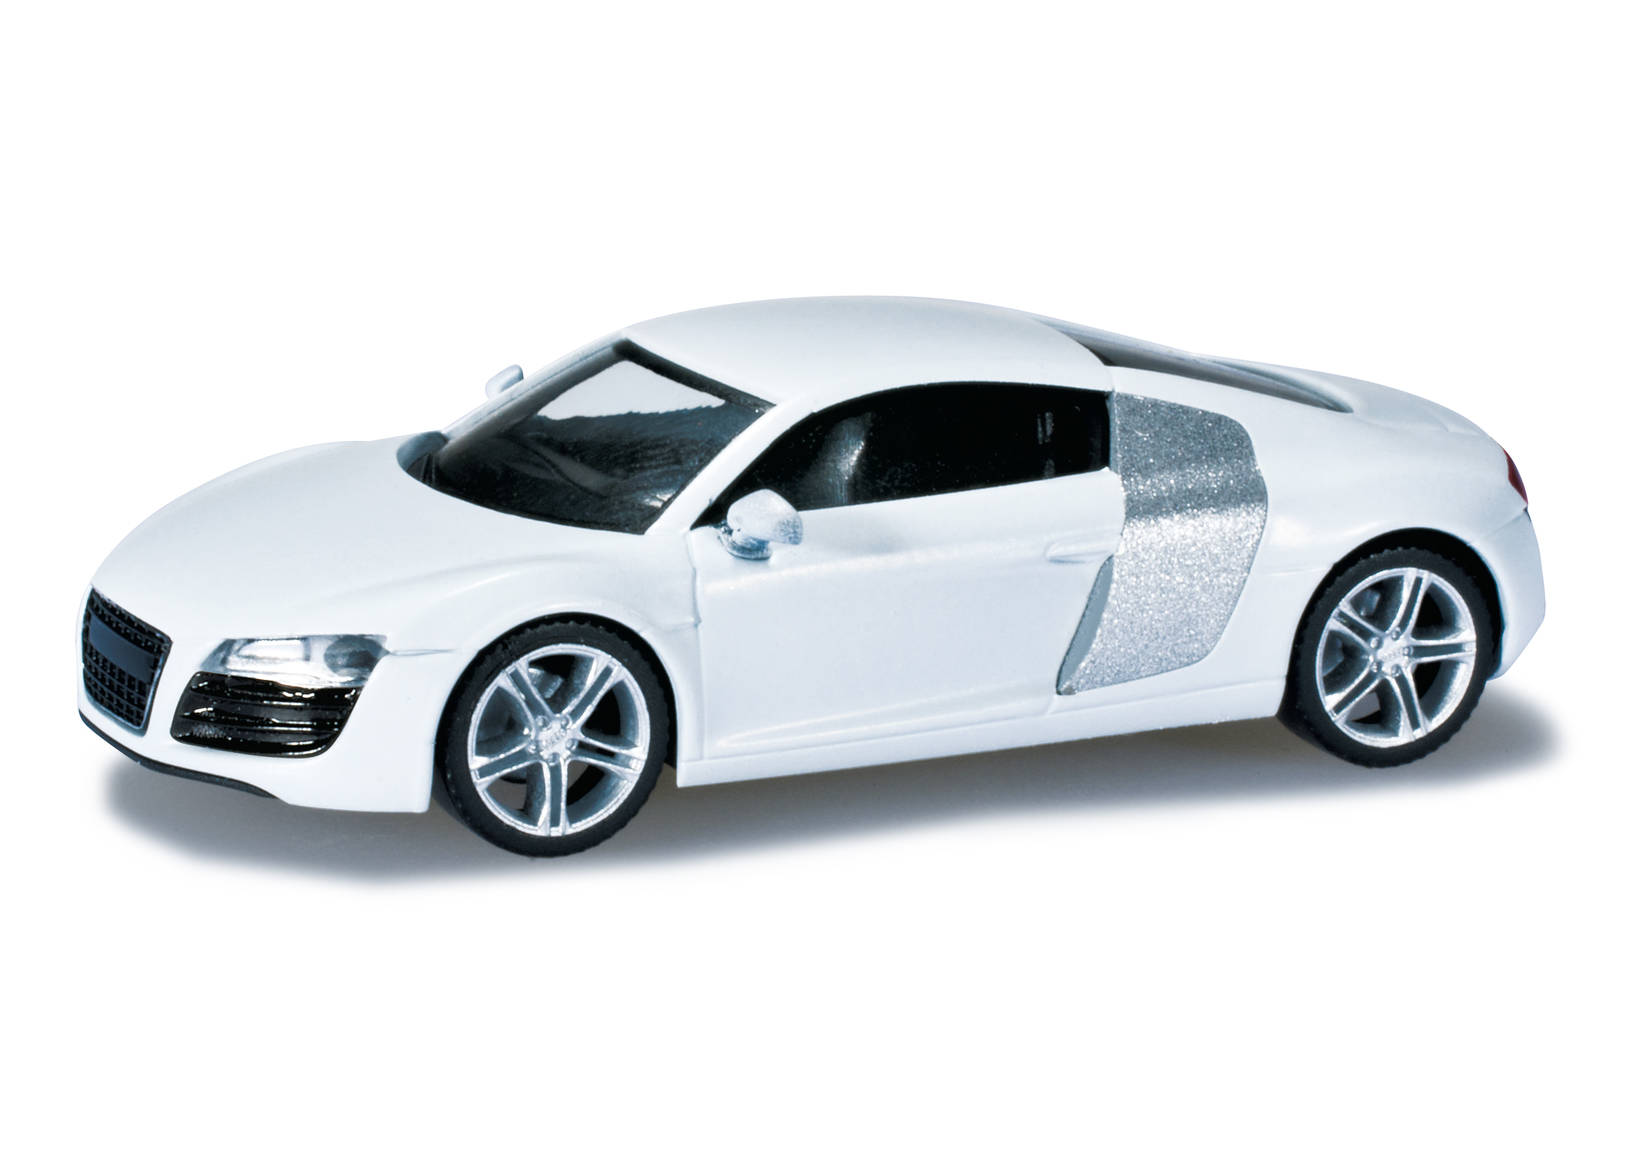 Audi R8 facelift, ibisweiß